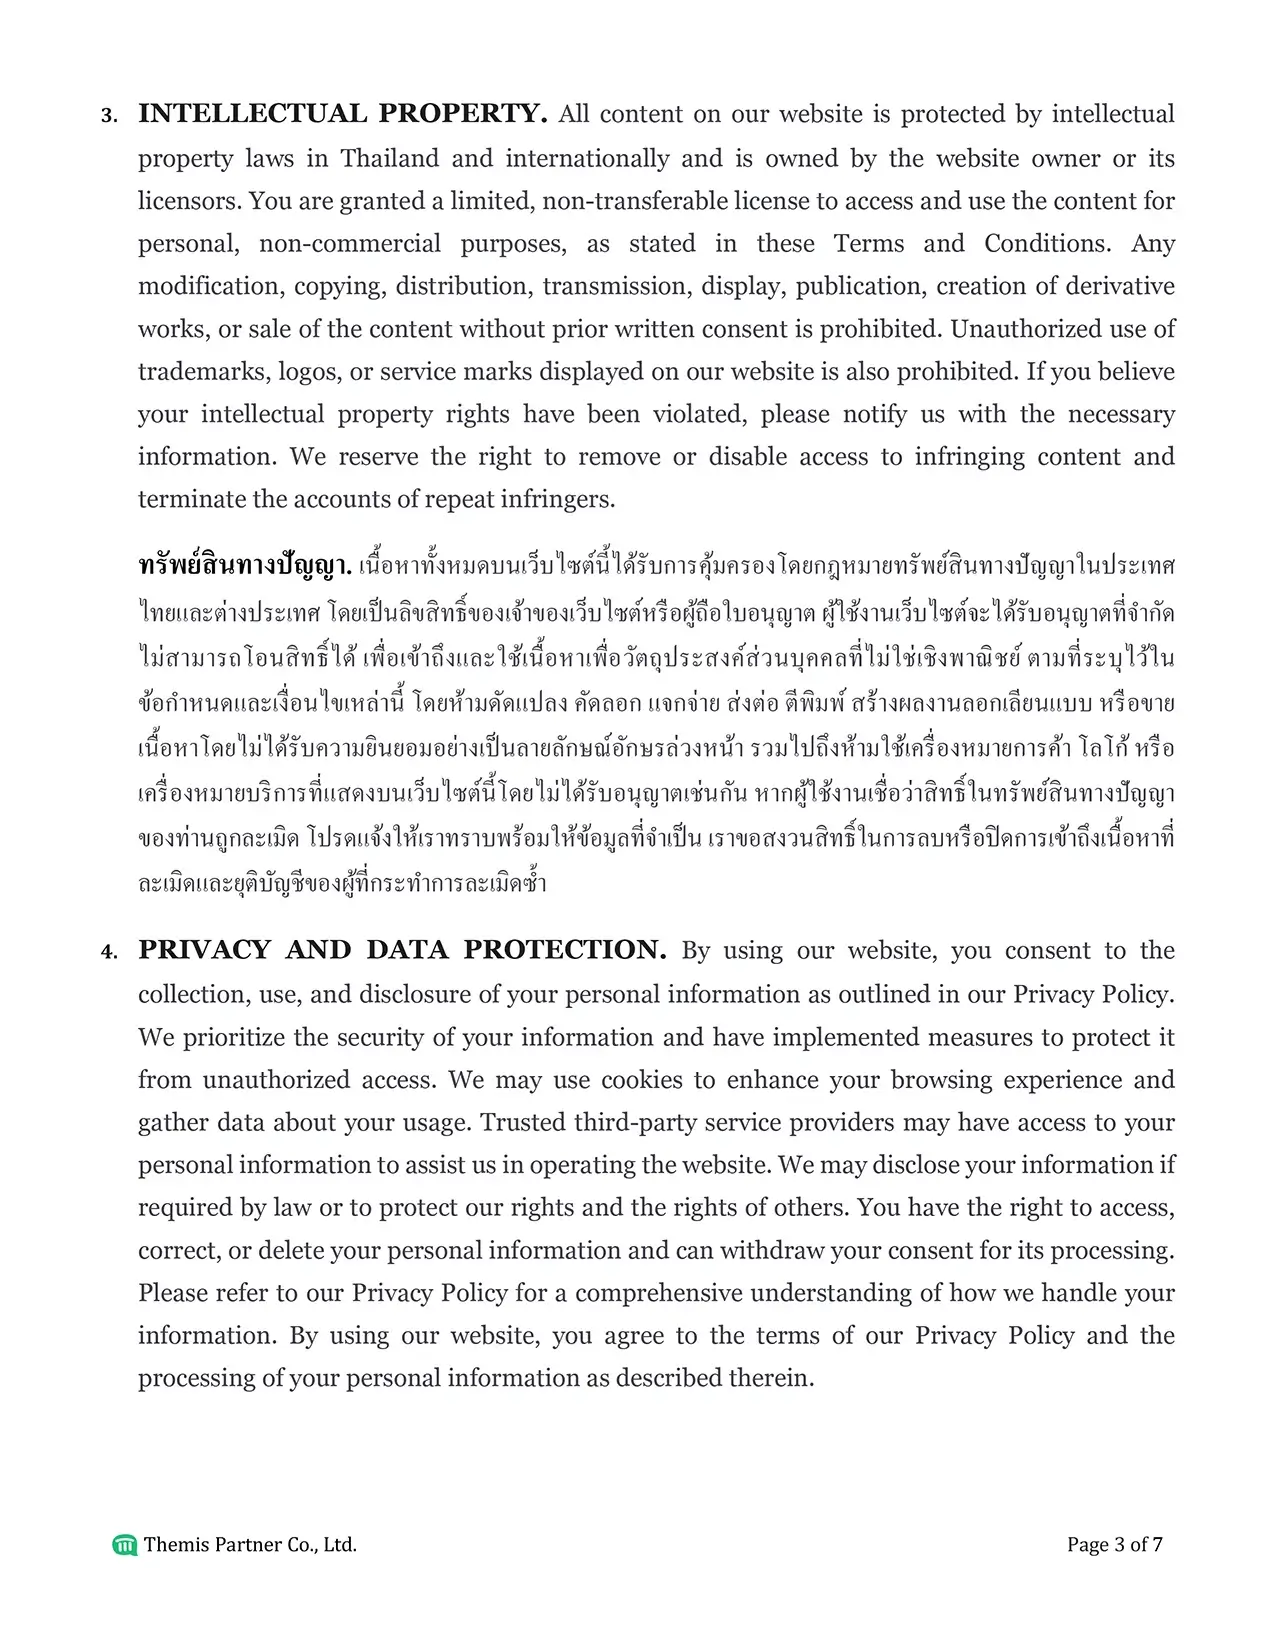 Terms and conditions Thailand 3